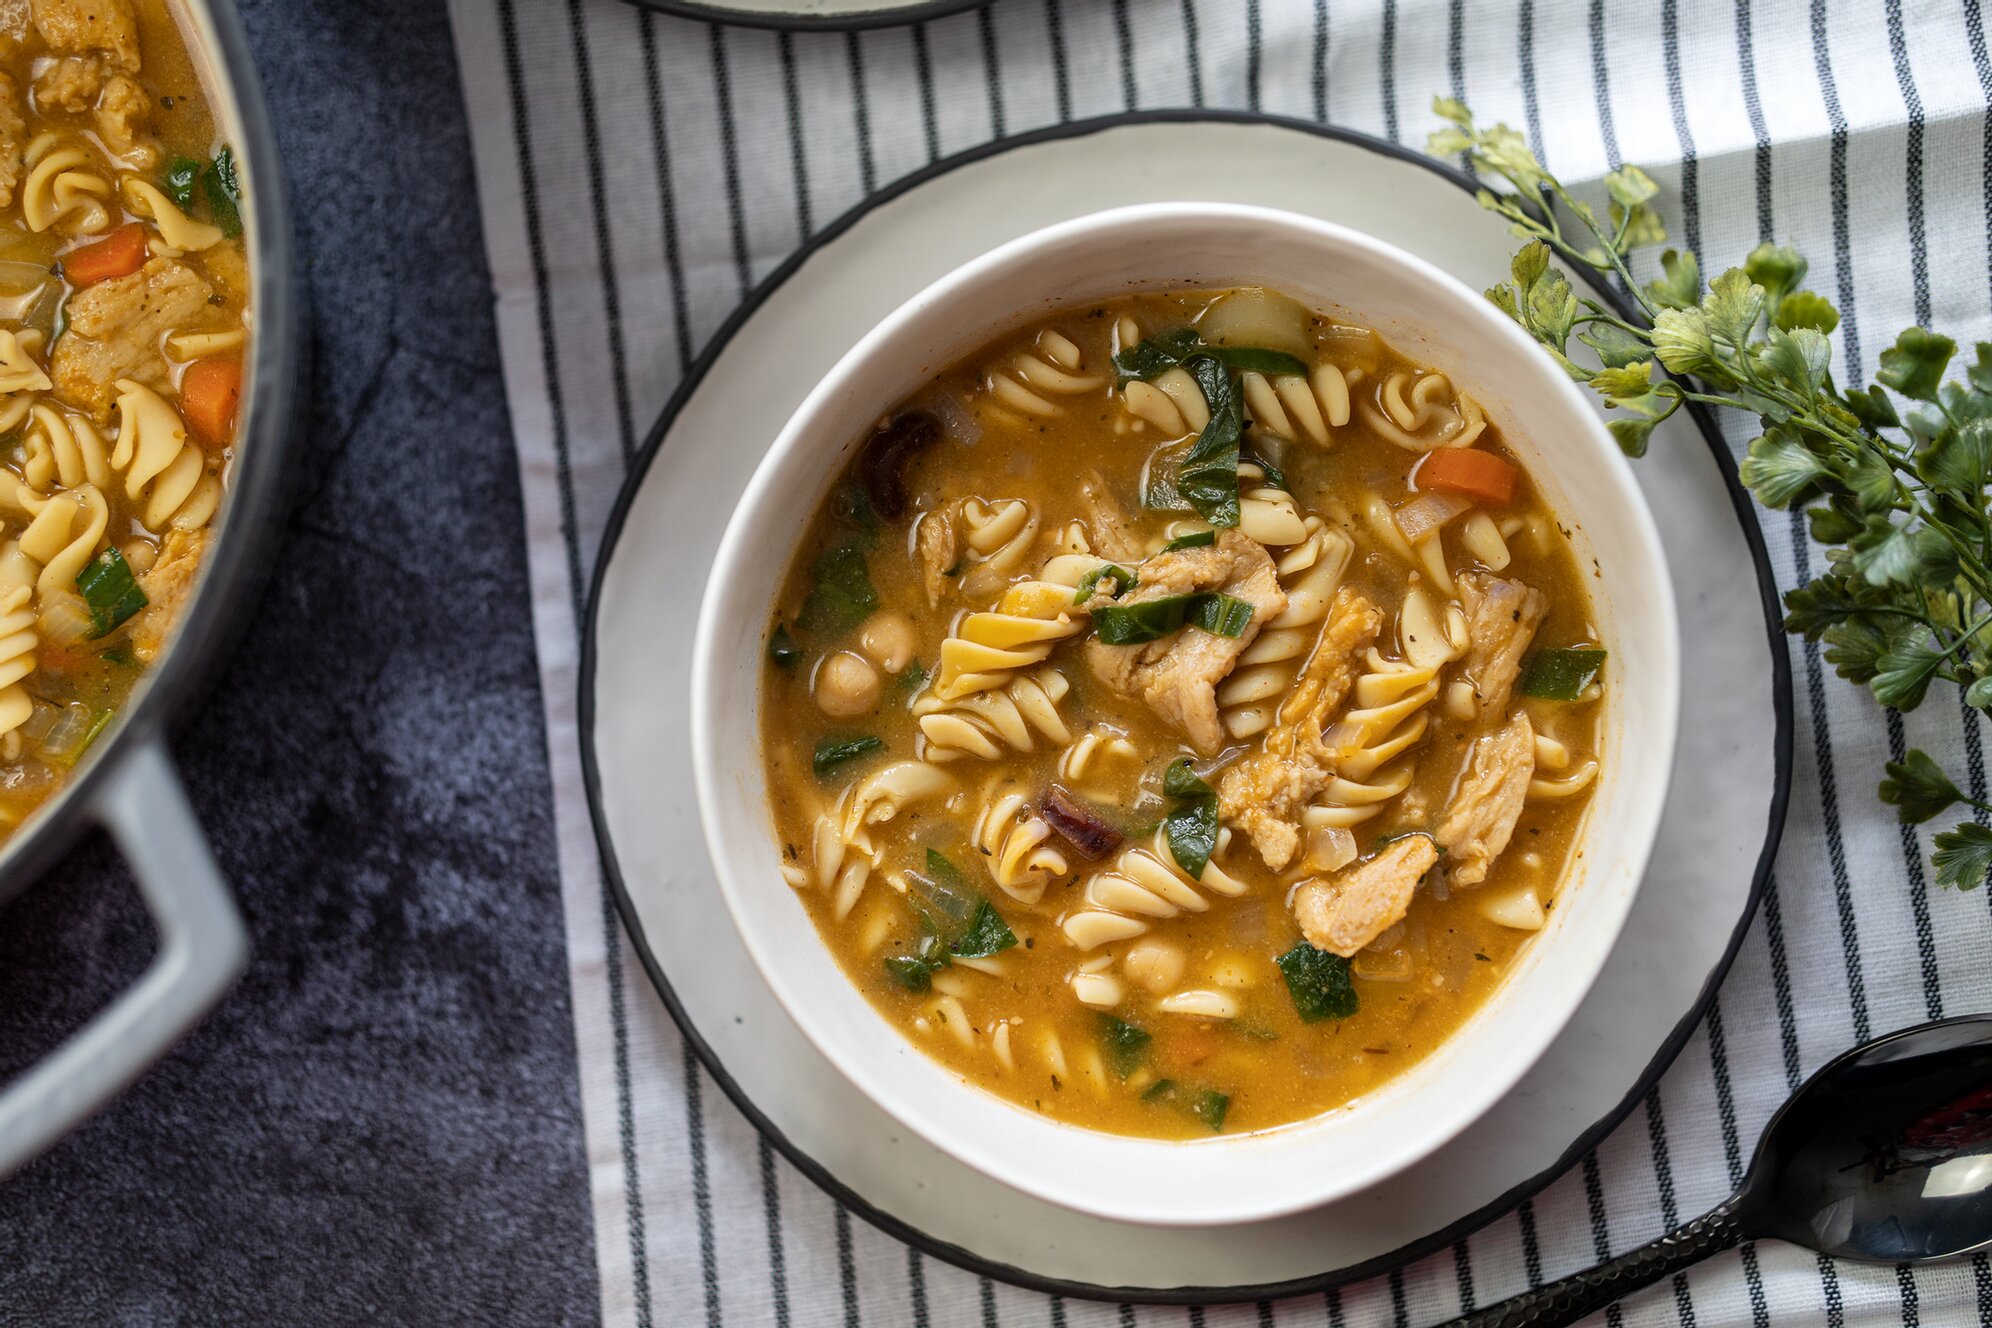 EASY Chickpea Noodle Soup